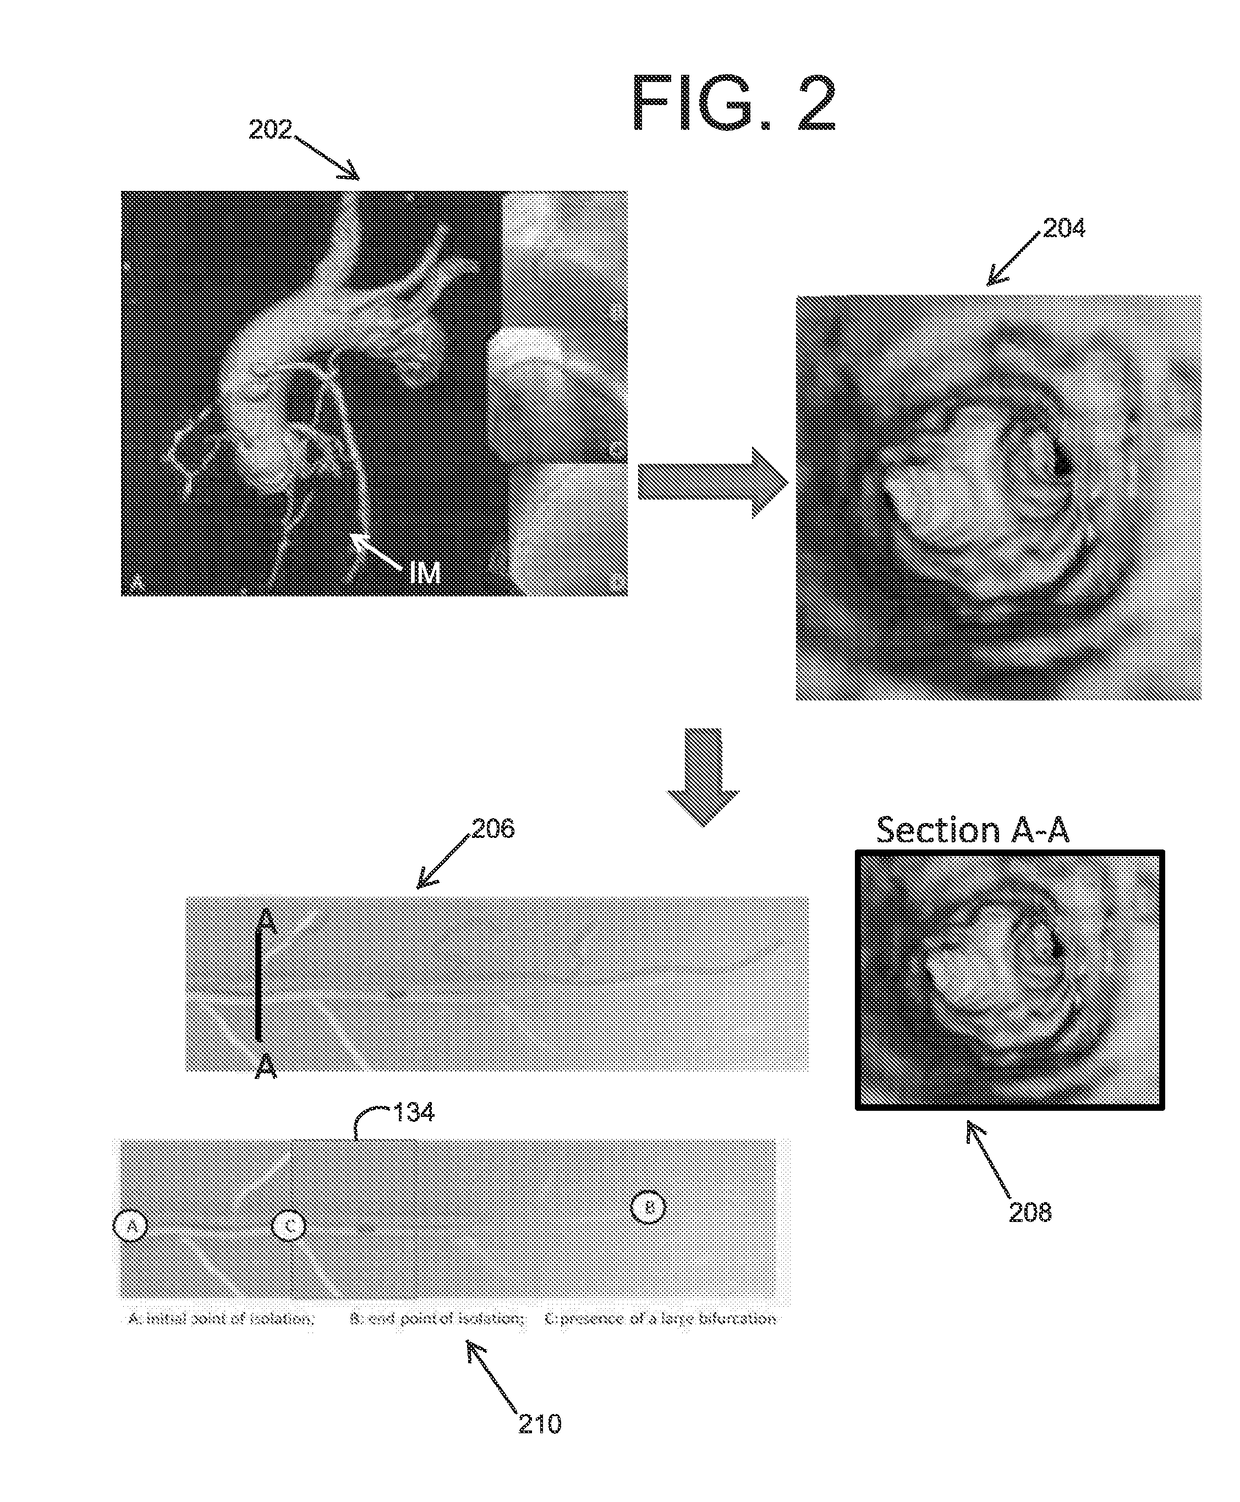 Spatial visualization of internal mammary artery during minimally invasive bypass surgery